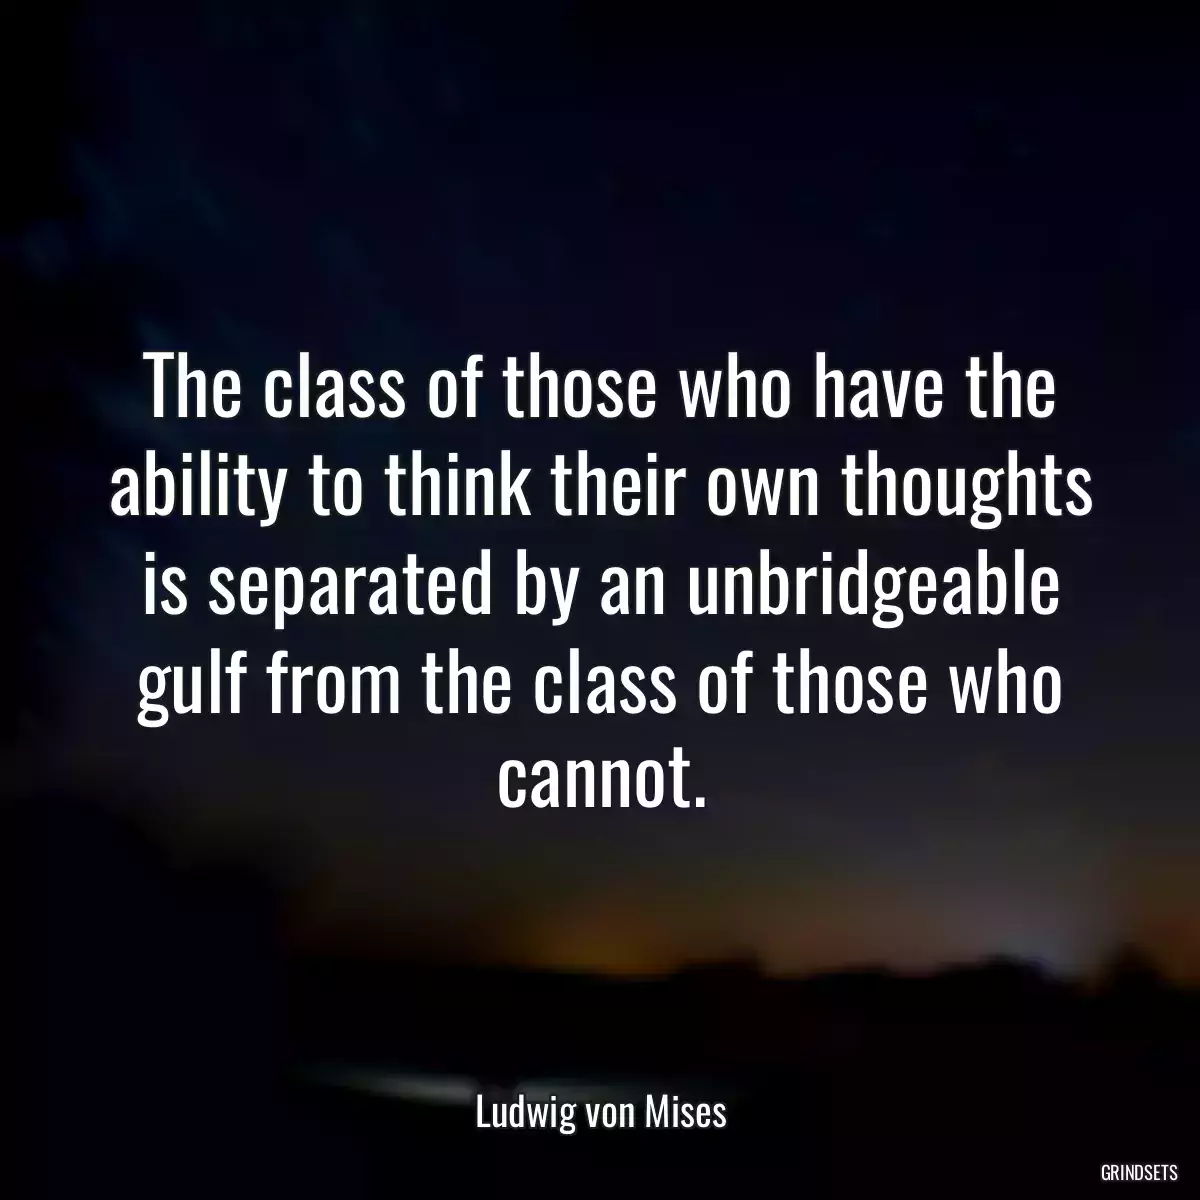 The class of those who have the ability to think their own thoughts is separated by an unbridgeable gulf from the class of those who cannot.